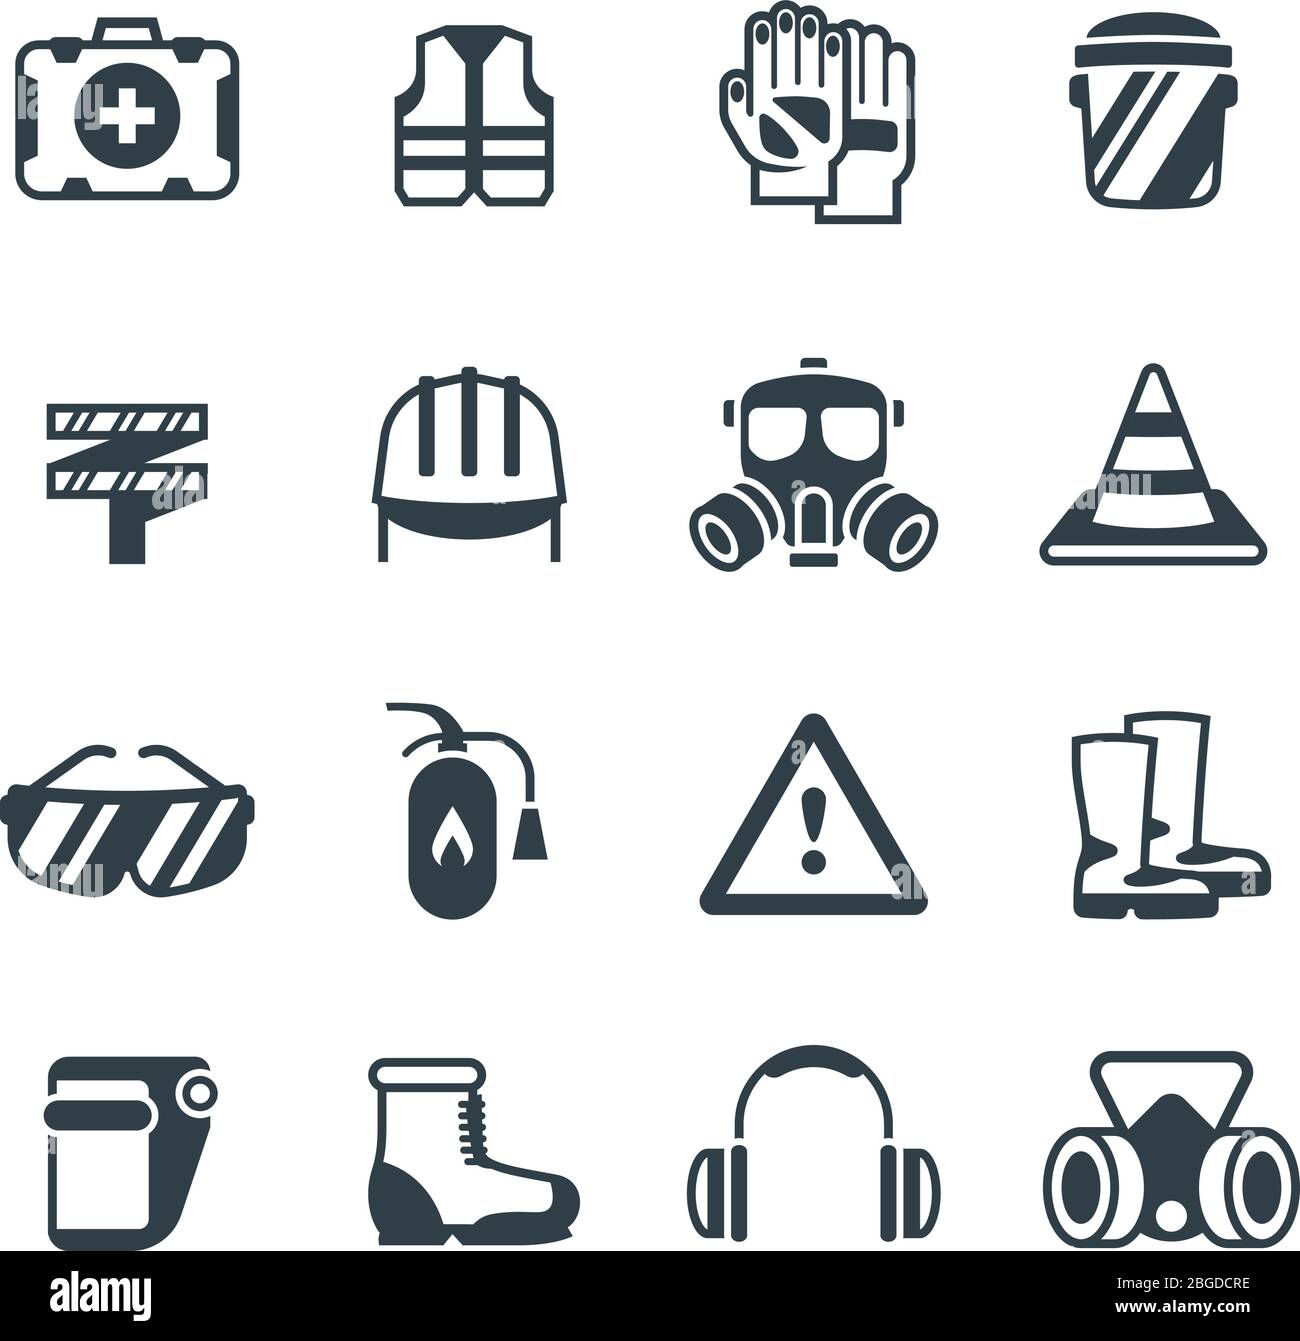 Industrial security, occupational safety work and healthcare. Protective clothing and equipmen vector icons isolated. Protection equipment and clothing, glove respirator and headgear illustration Stock Vector